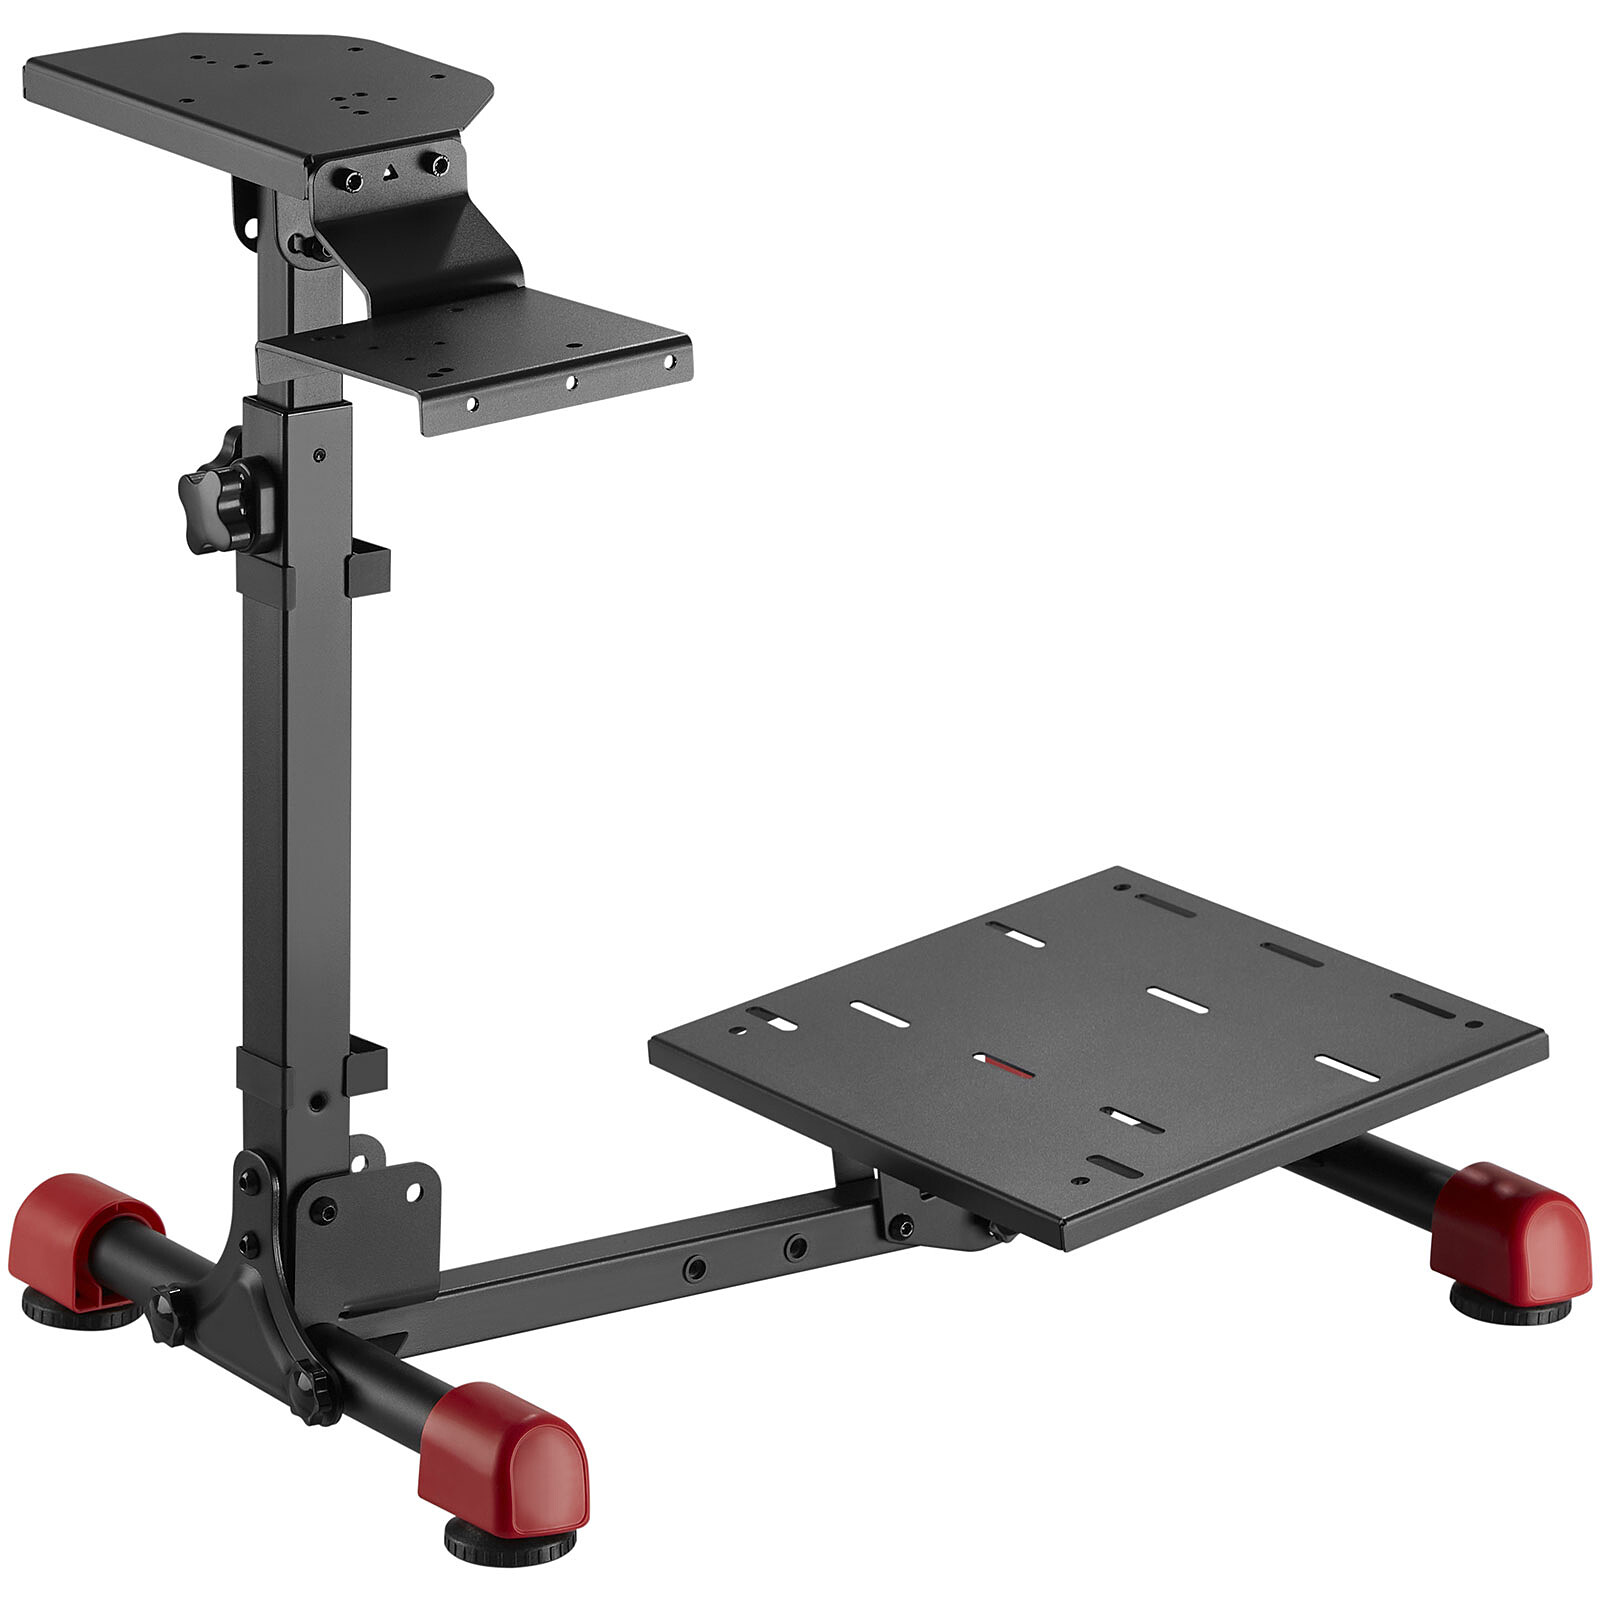 OPLITE Wheel Stand GT - Other gaming accessories - LDLC 3-year warranty